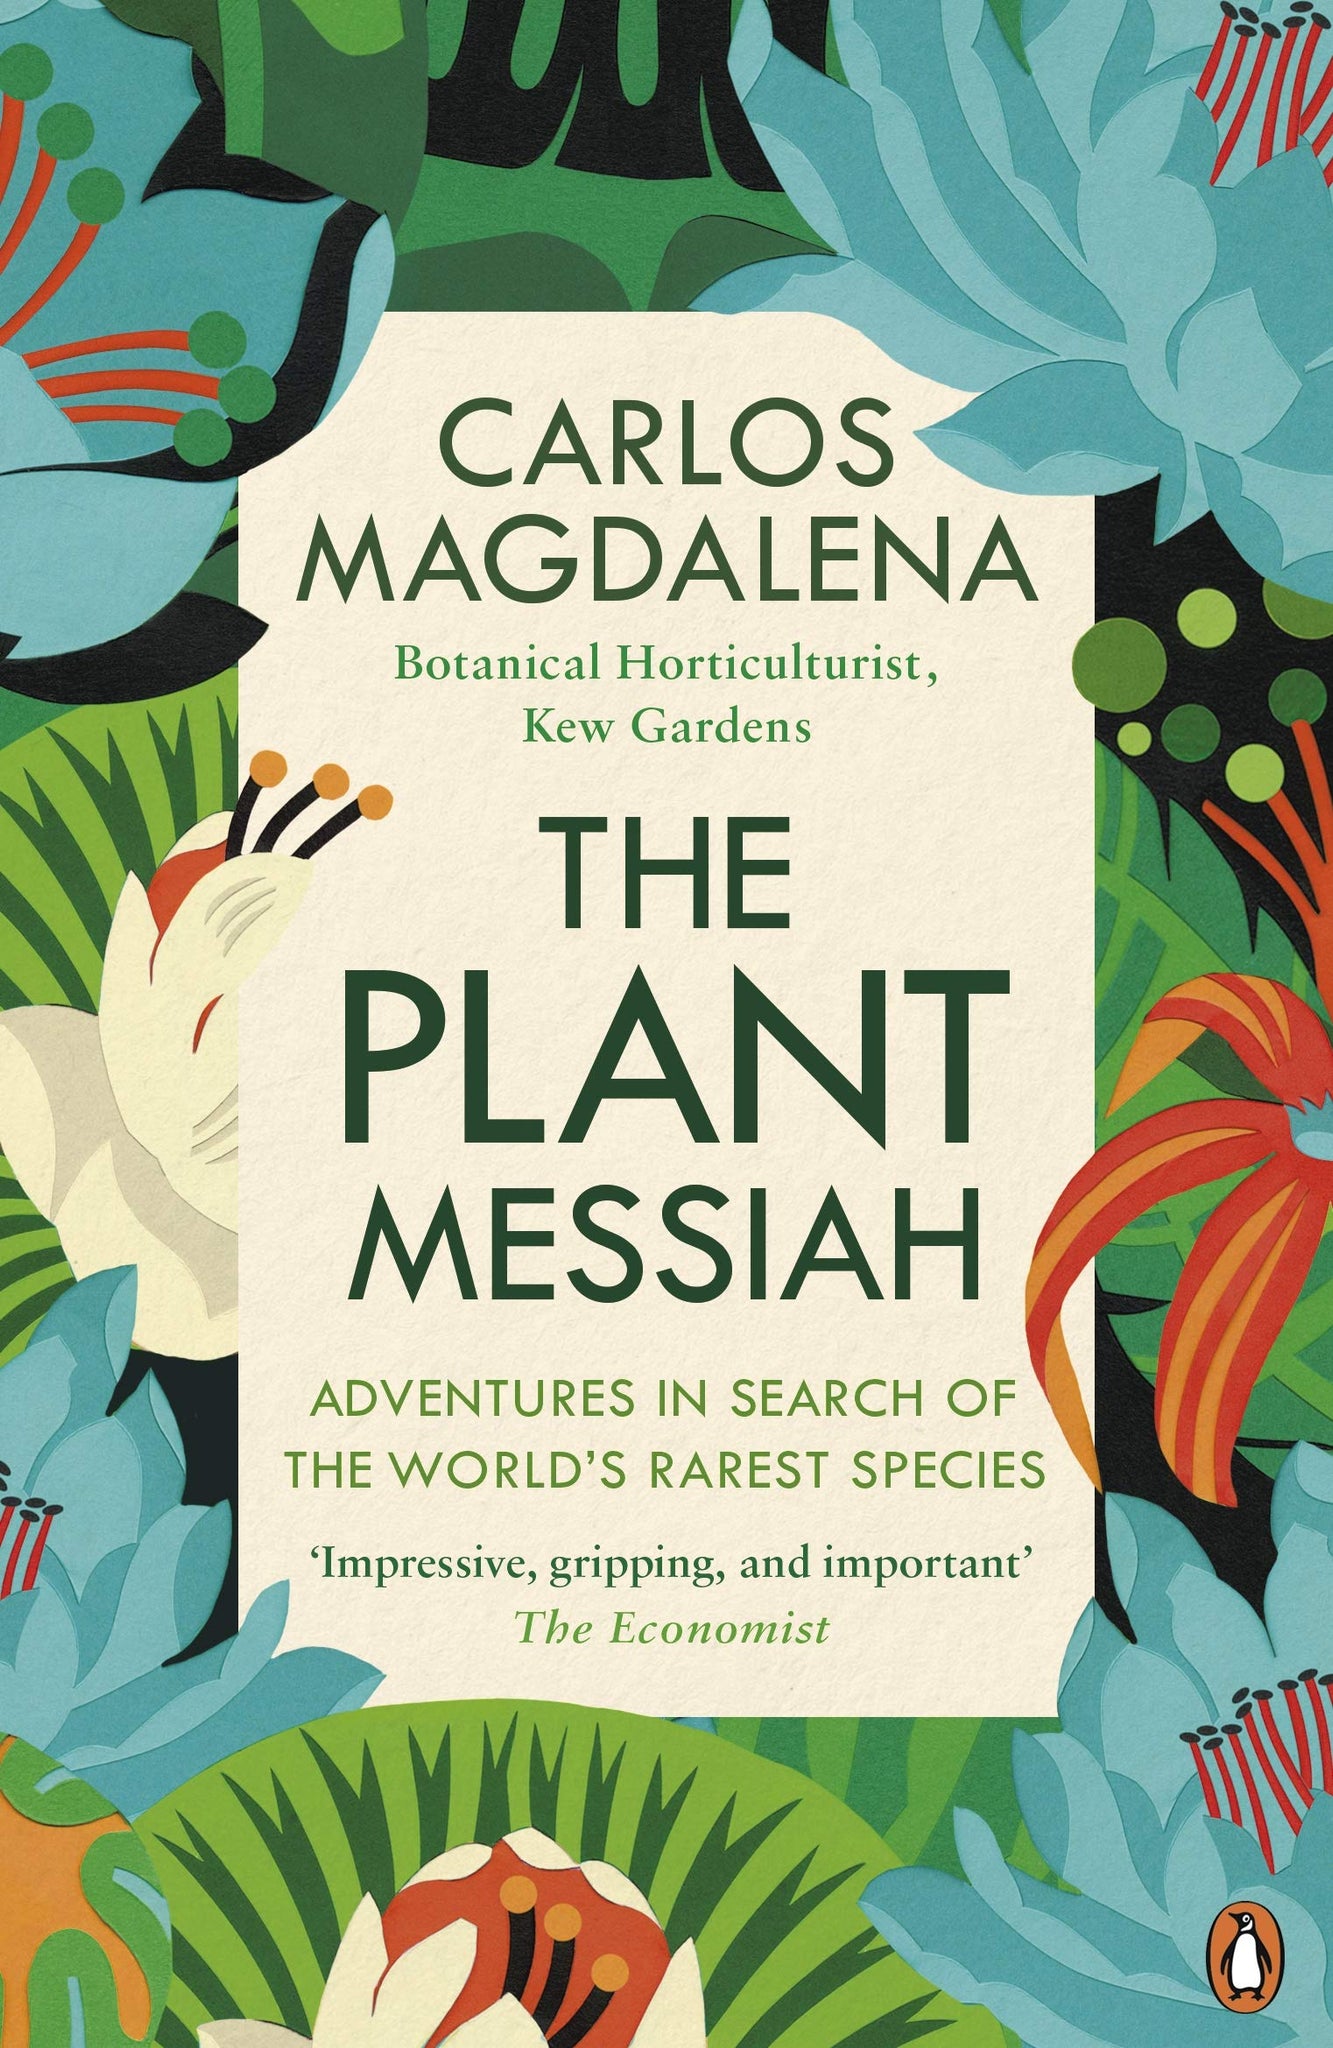 The Plant Messiah: Adventures In Search Of The World’s Rarest Species